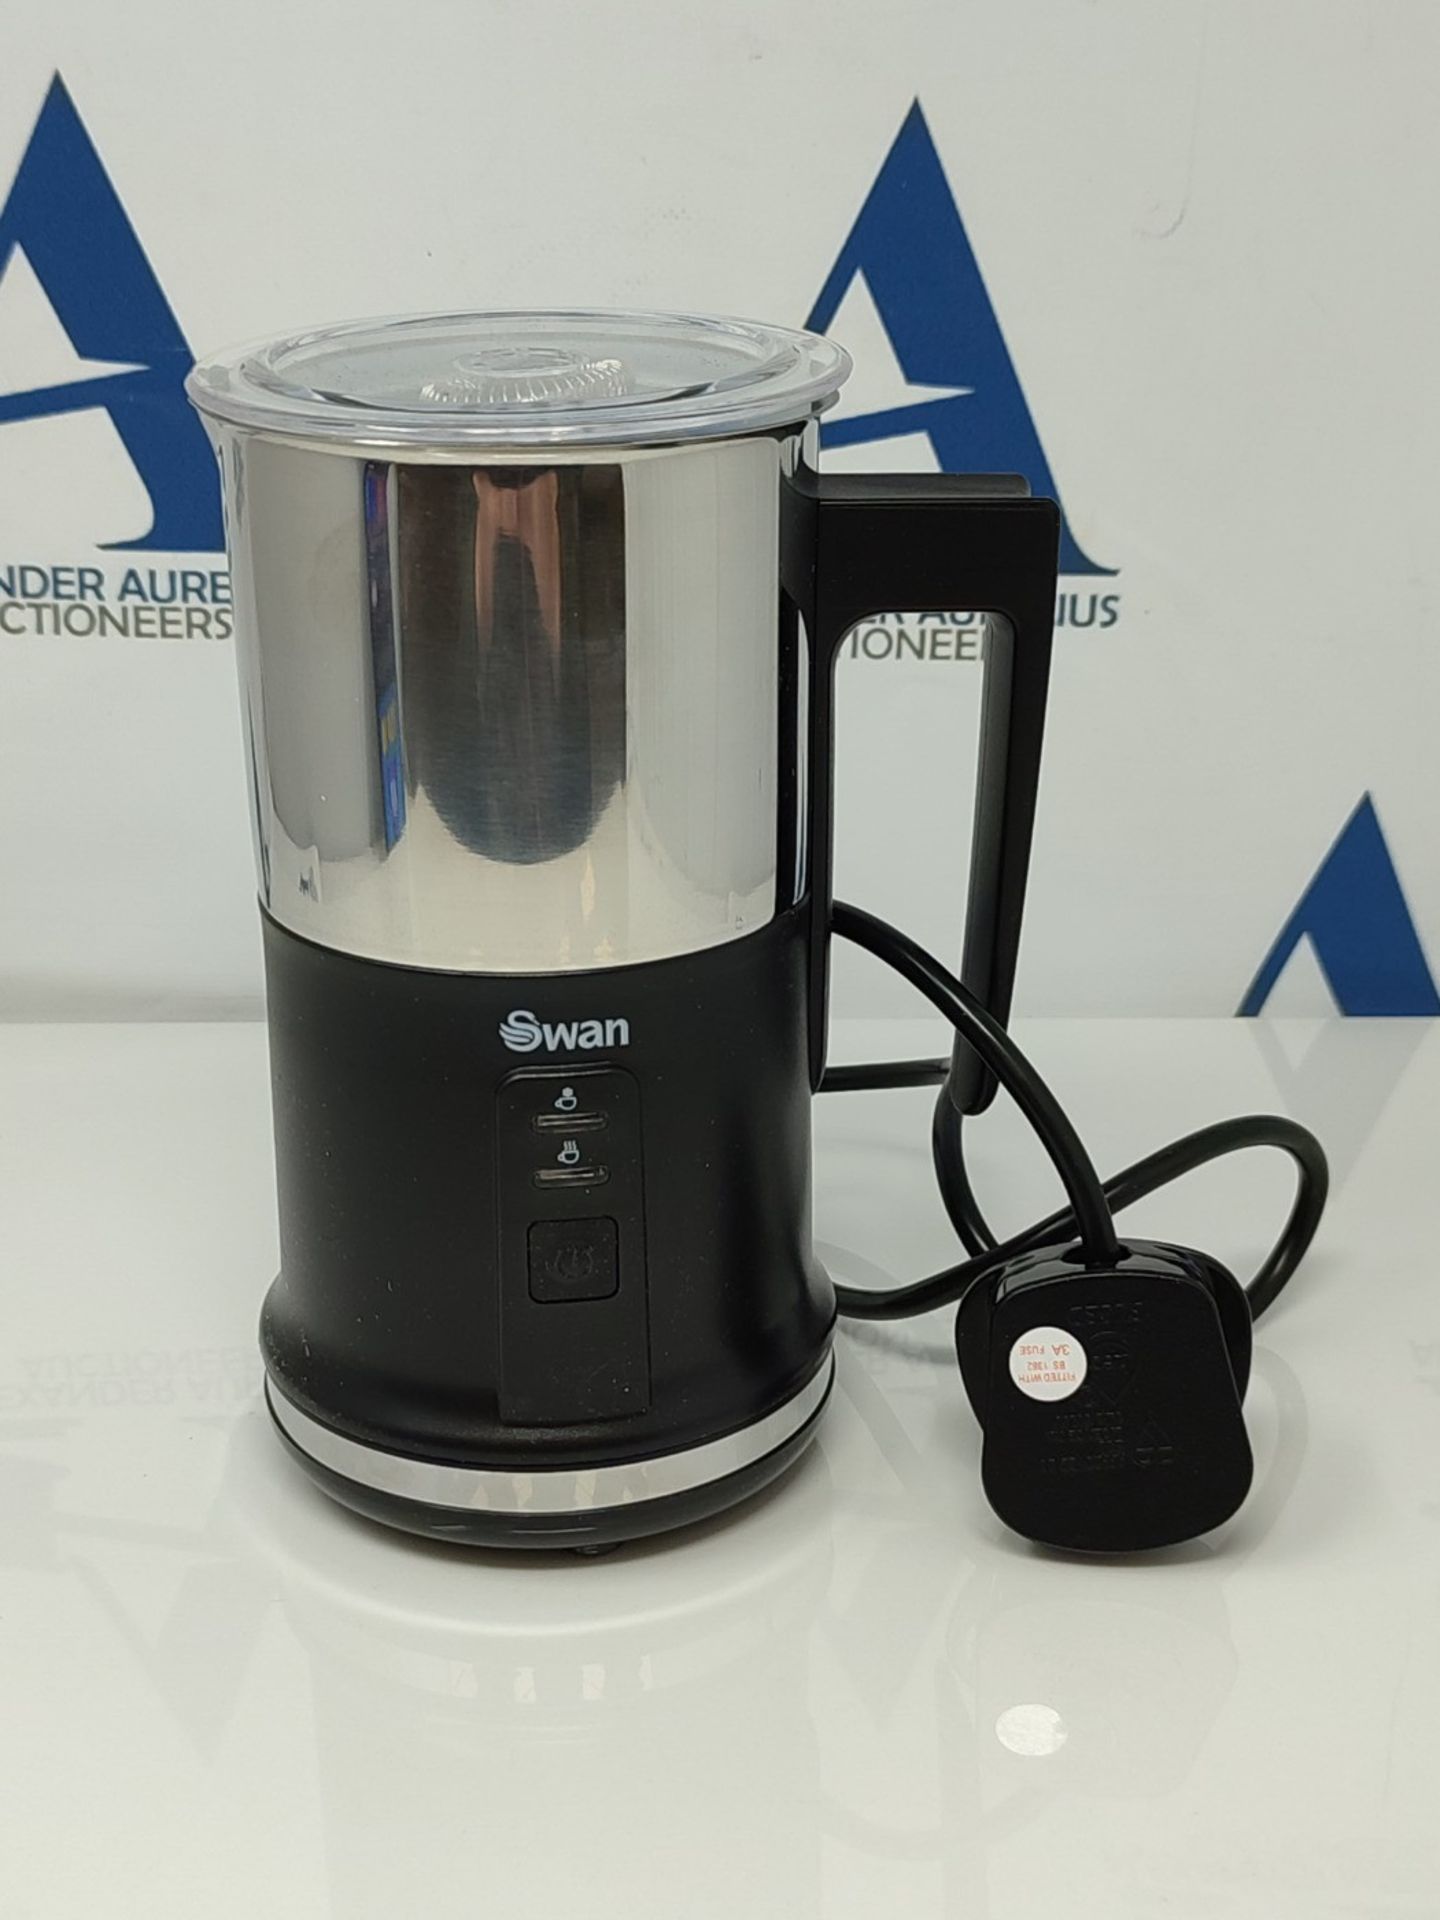 Swan, Automatic Milk Frother and Warmer, 2 Layer Non-Stick Coating, 500W, 500 W, Black - Bild 3 aus 3